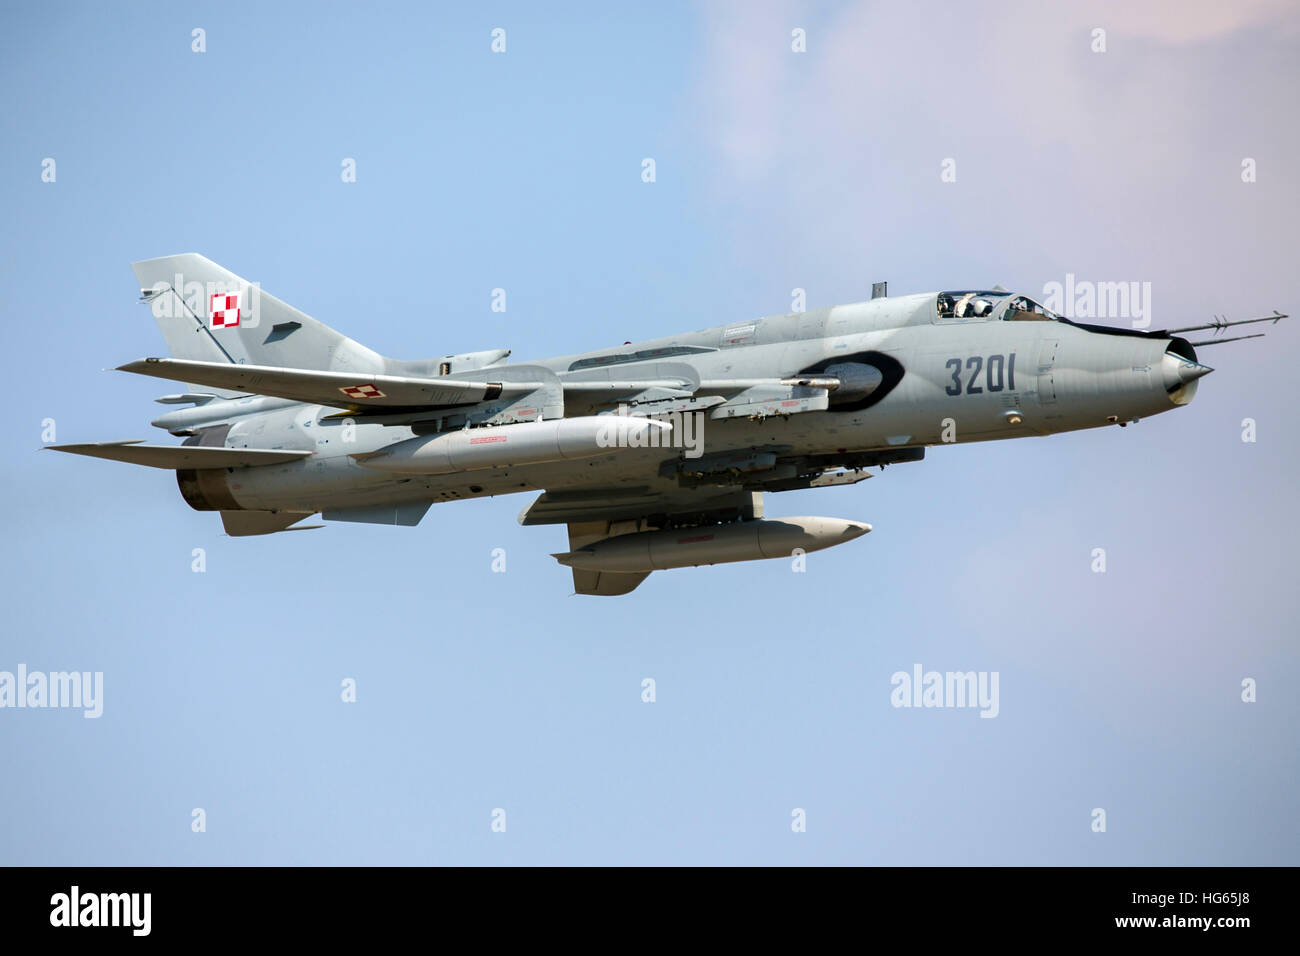 Polish Air Force Su-22 fighter-bomber in flight over the Czech Republic. Stock Photo